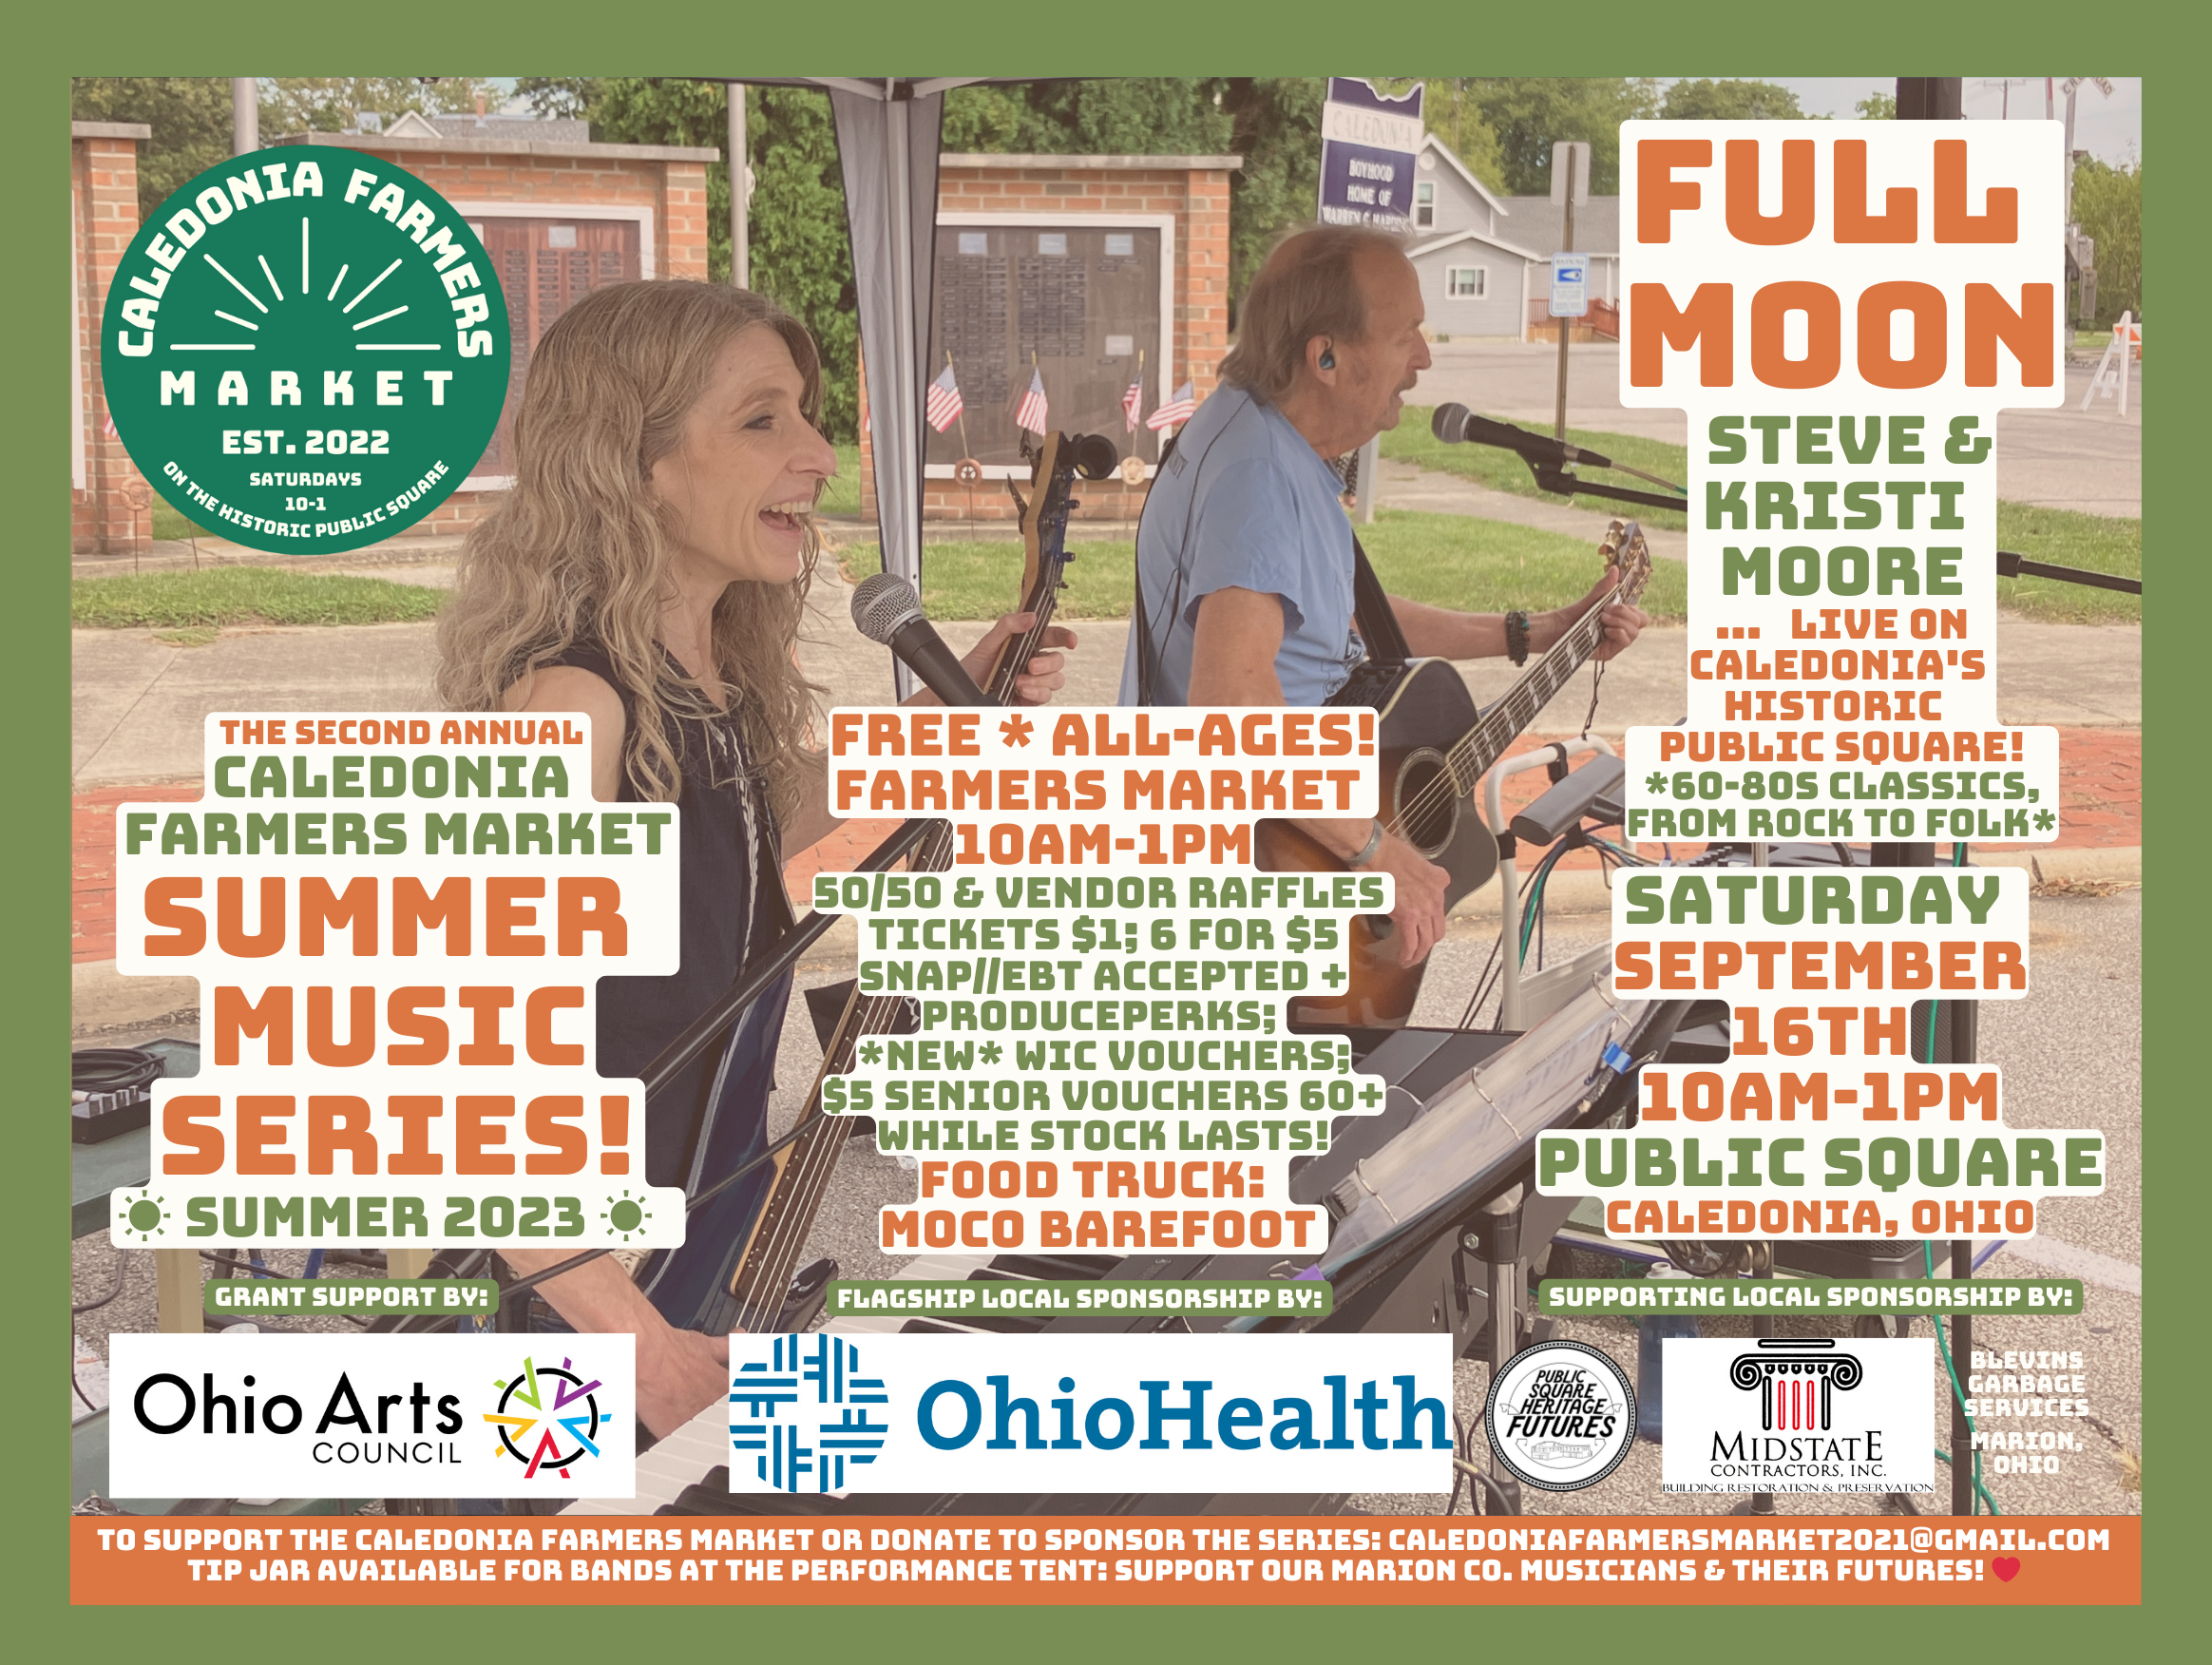 background features performers Kristi and Steve Moore playing guitars and singing with sponsor logos: OhioHealth, MidState Contractors, and Ohio Arts Council in the foreground